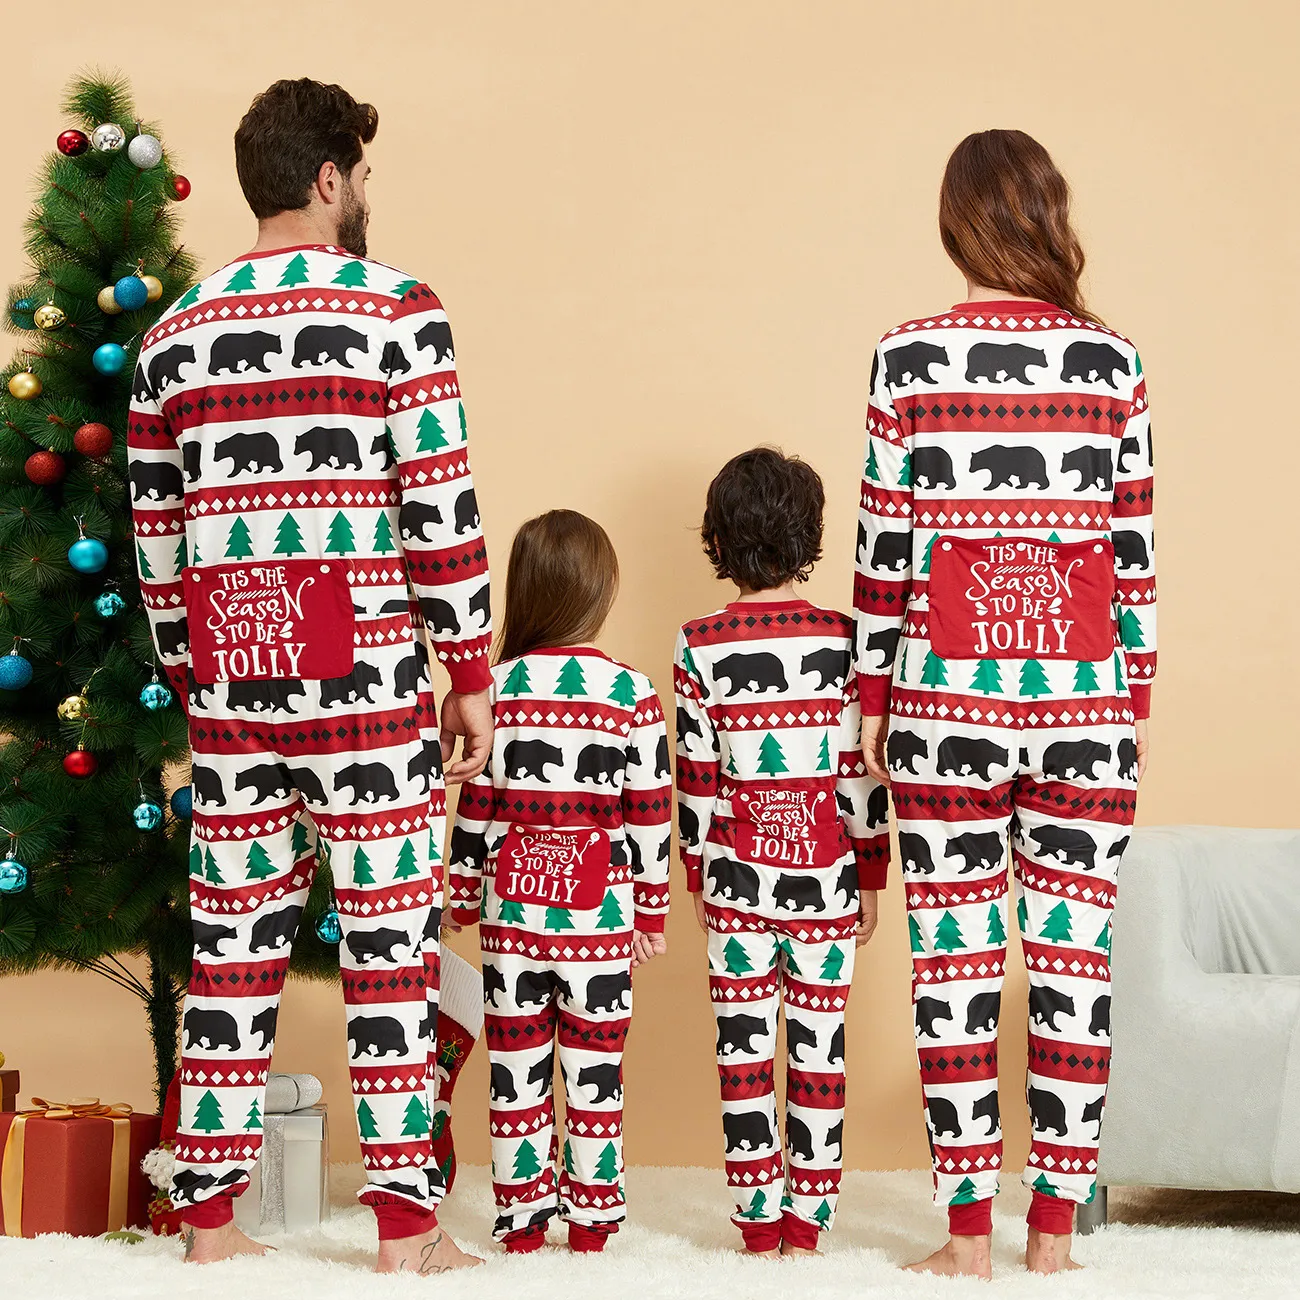 Christmas Tree and Bear Patterned Family Matching Onesies Flapjack Pajamas (Flame Resistant)